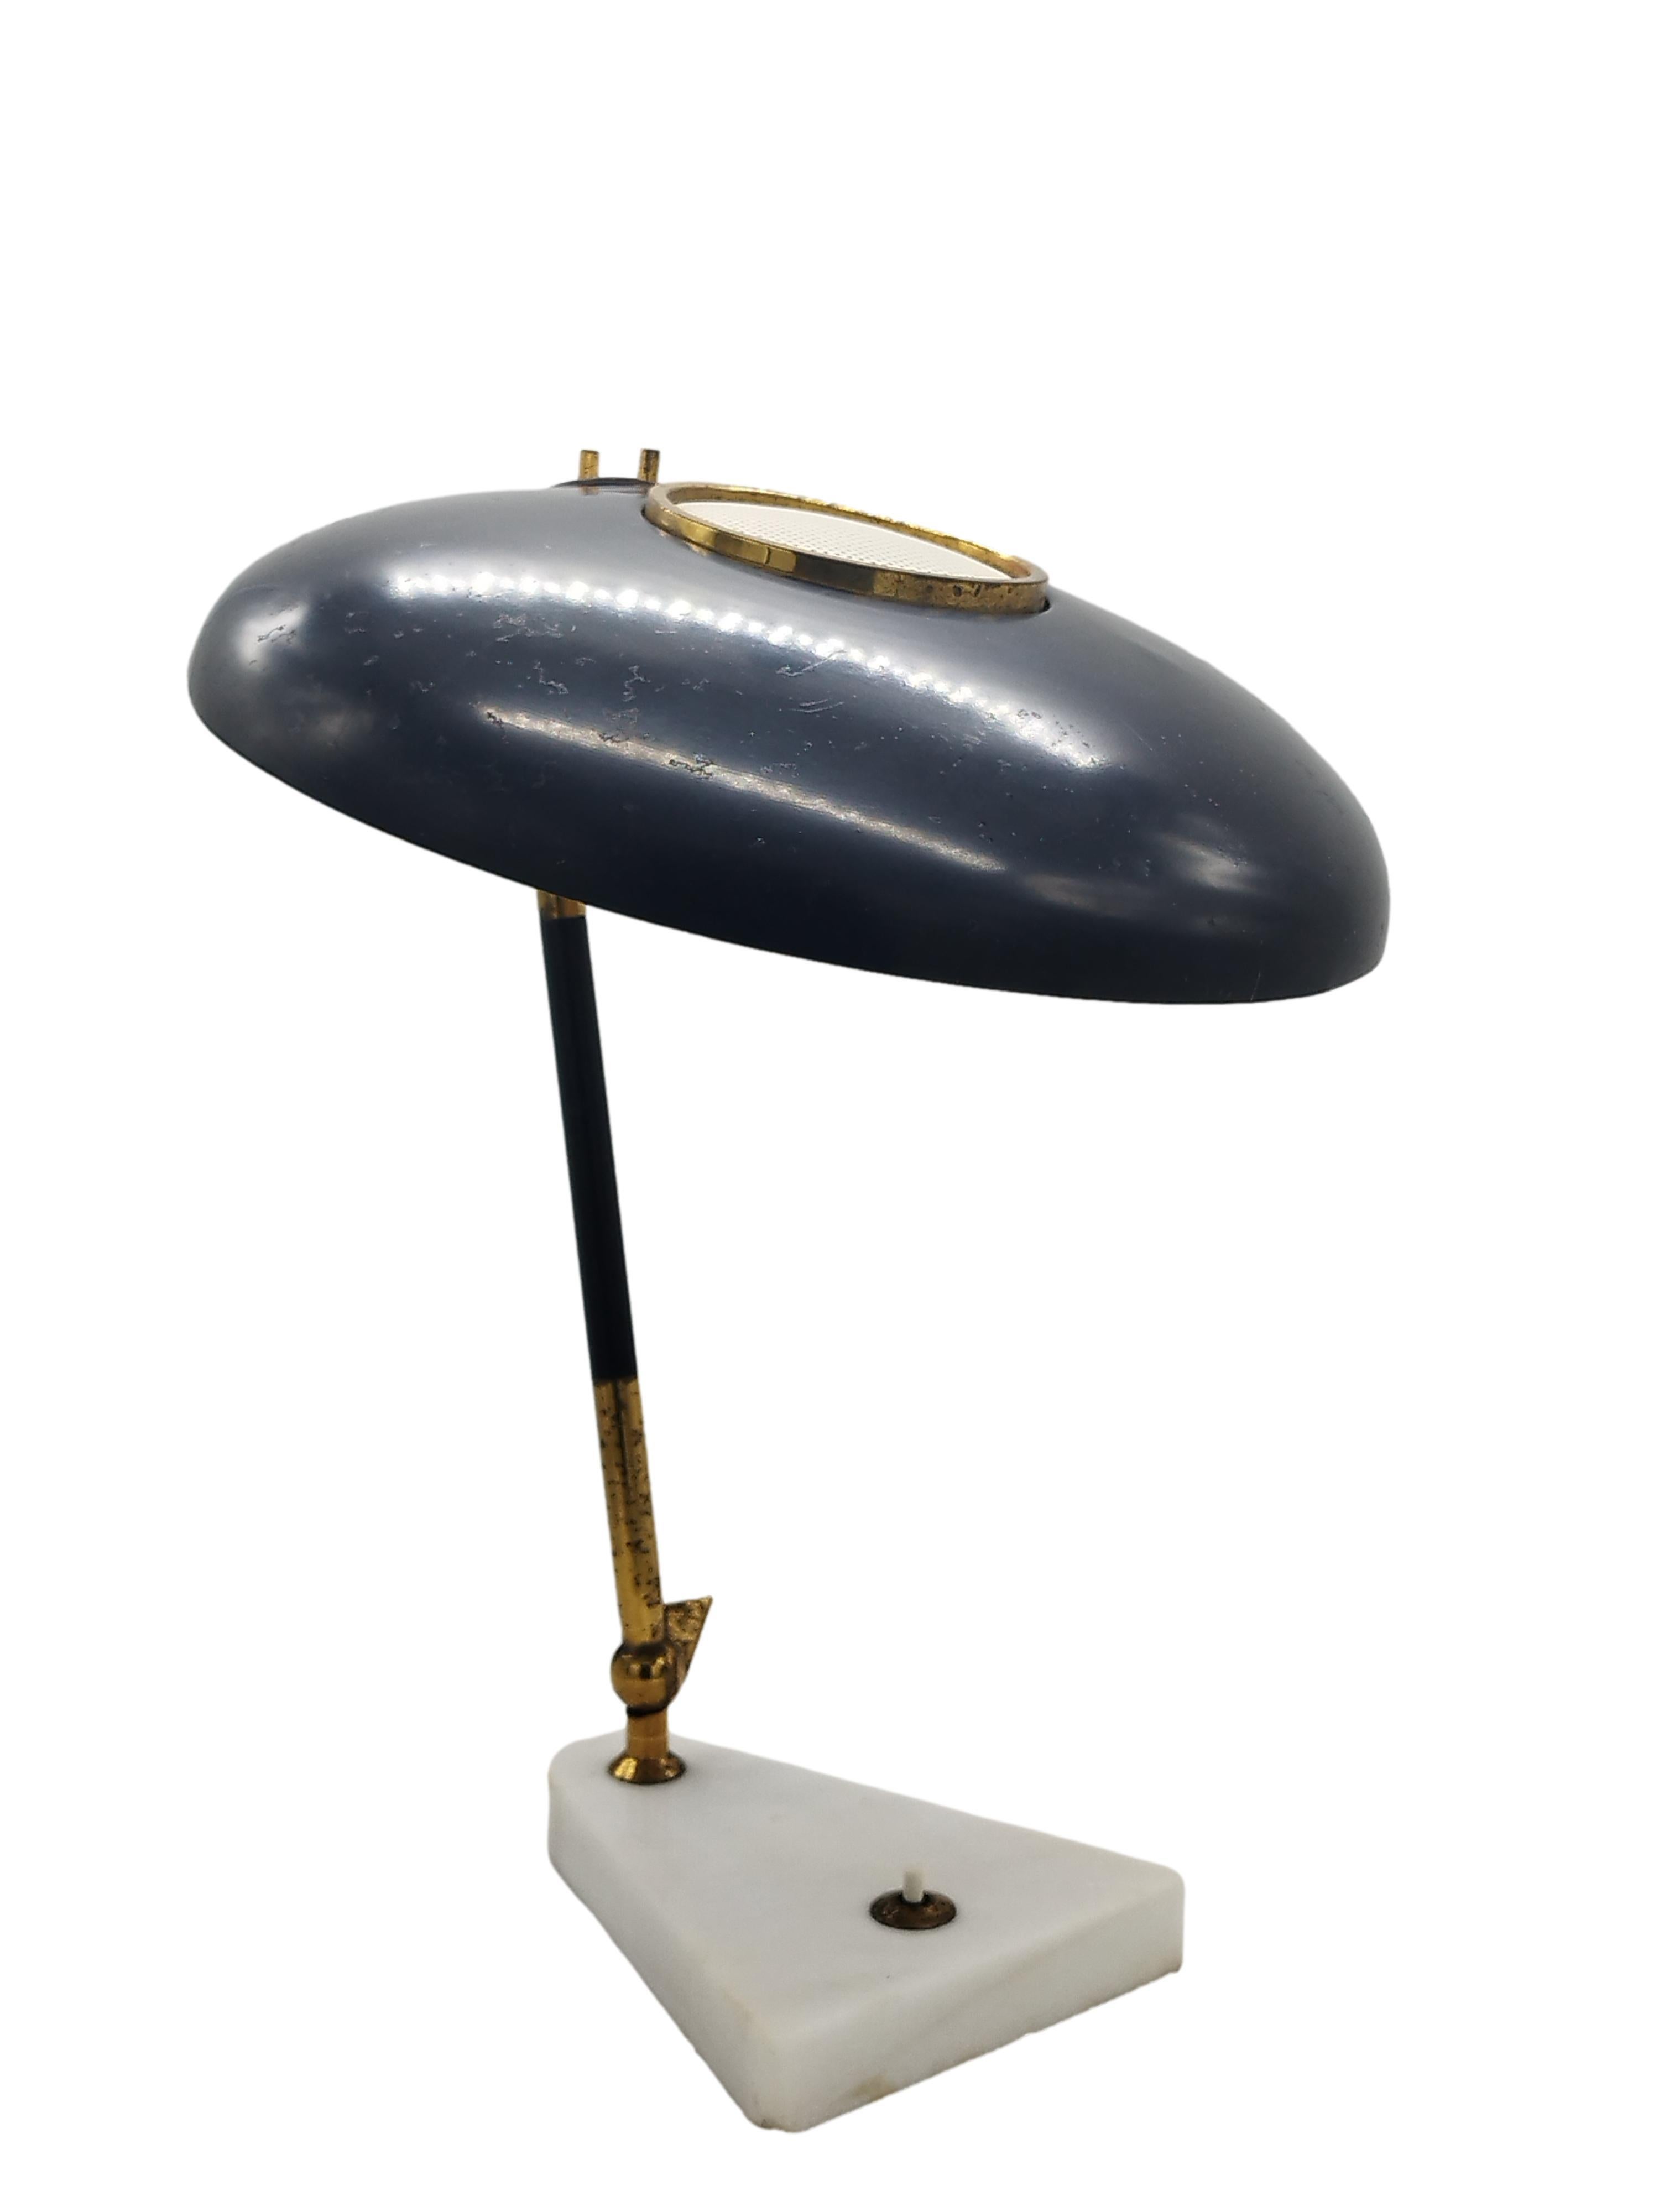 Original Oscar Torlasco table lamp from the 1950s with original black paint shade and white marble base with brass elements. In good condition.
